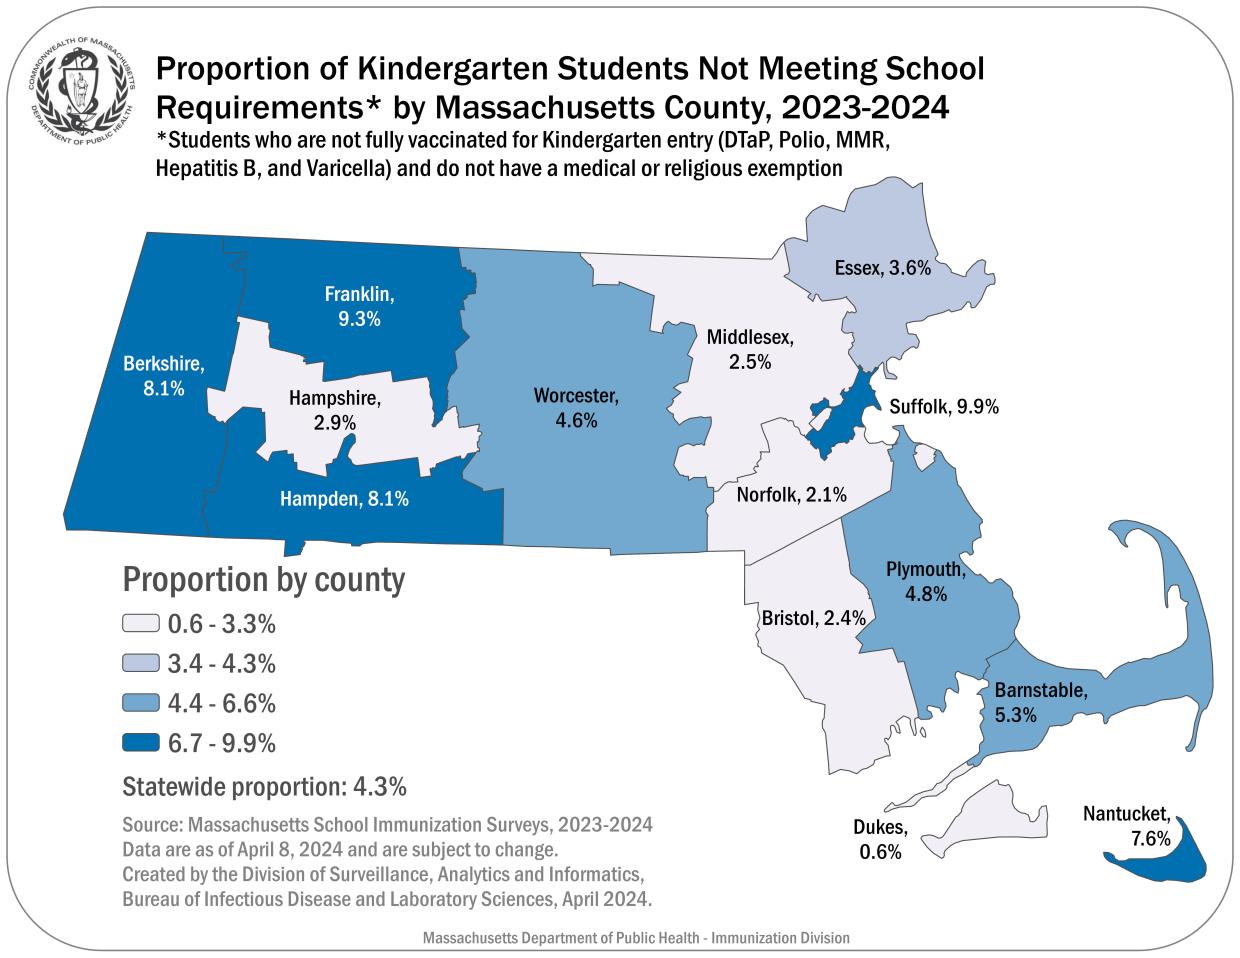 This map shows the proportion of Kindergarten Students by Mass County Not Meeting School Requirements, 2023-2024. These data are current as of 4/8/24 and are subject to change. The source of these data is via the Mass School Immunization Surveys 2023-2024. State average 4.3% Barnstable 5.3% Berkshire 8.1% Bristol 2.4% Dukes 0.6% Hampden 8.1% Hampshire 2.9% Essex 3.6% Franklin 9.3% Middlesex 2.5% Nantucket 7.6% Norfolk 2.1% Plymouth: 4.8% Suffolk 9.9% Worcester 4.6%